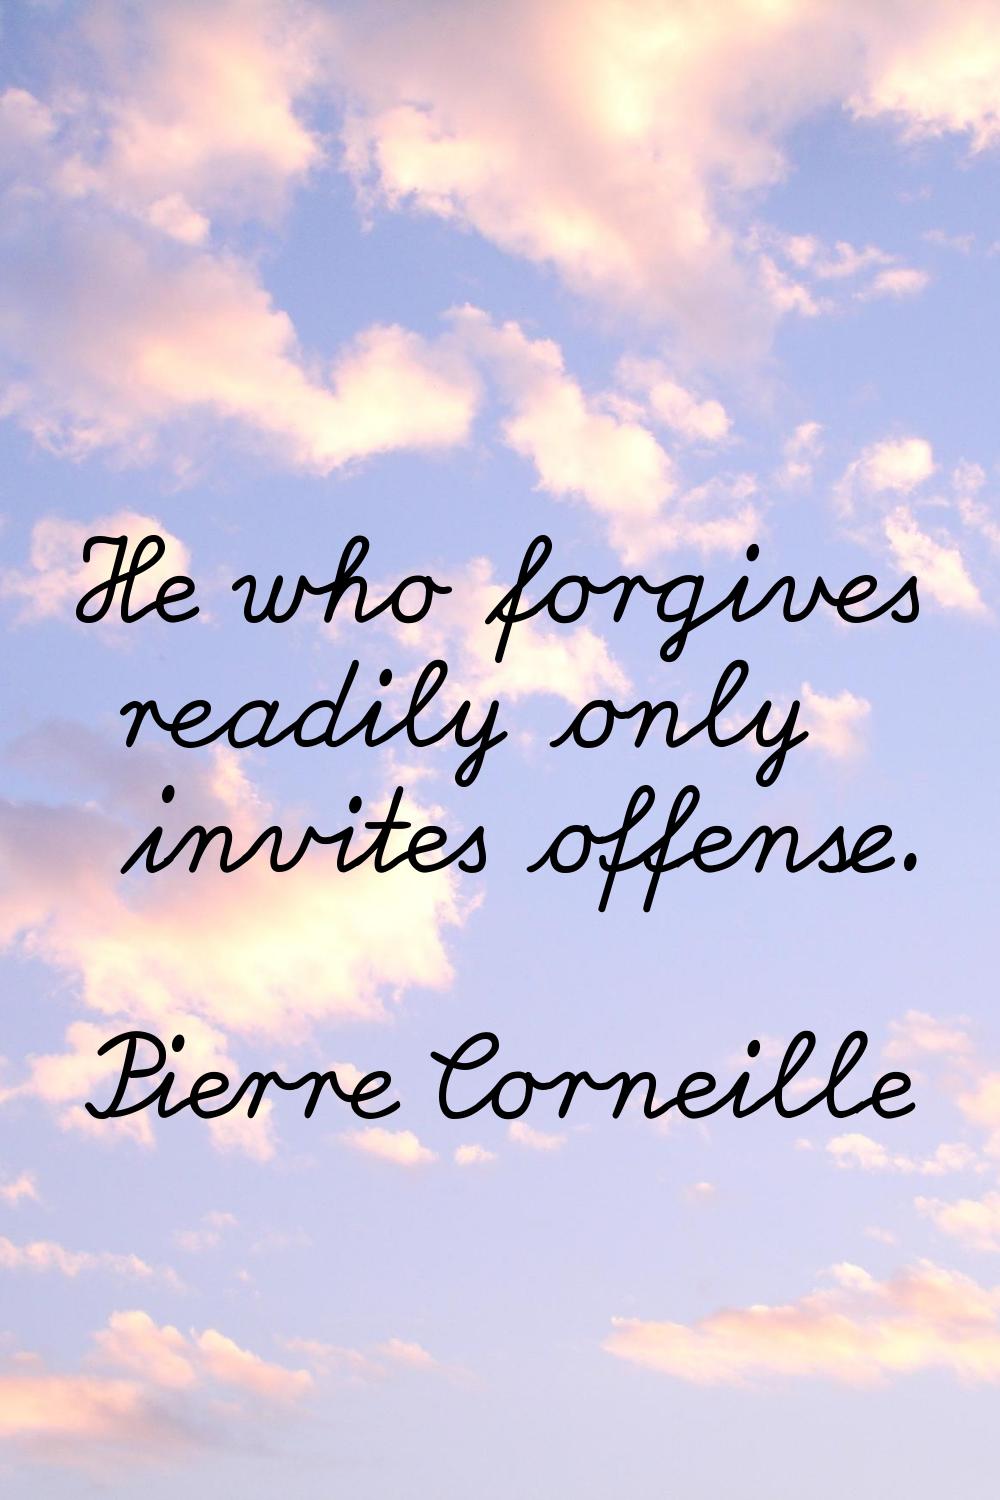 He who forgives readily only invites offense.